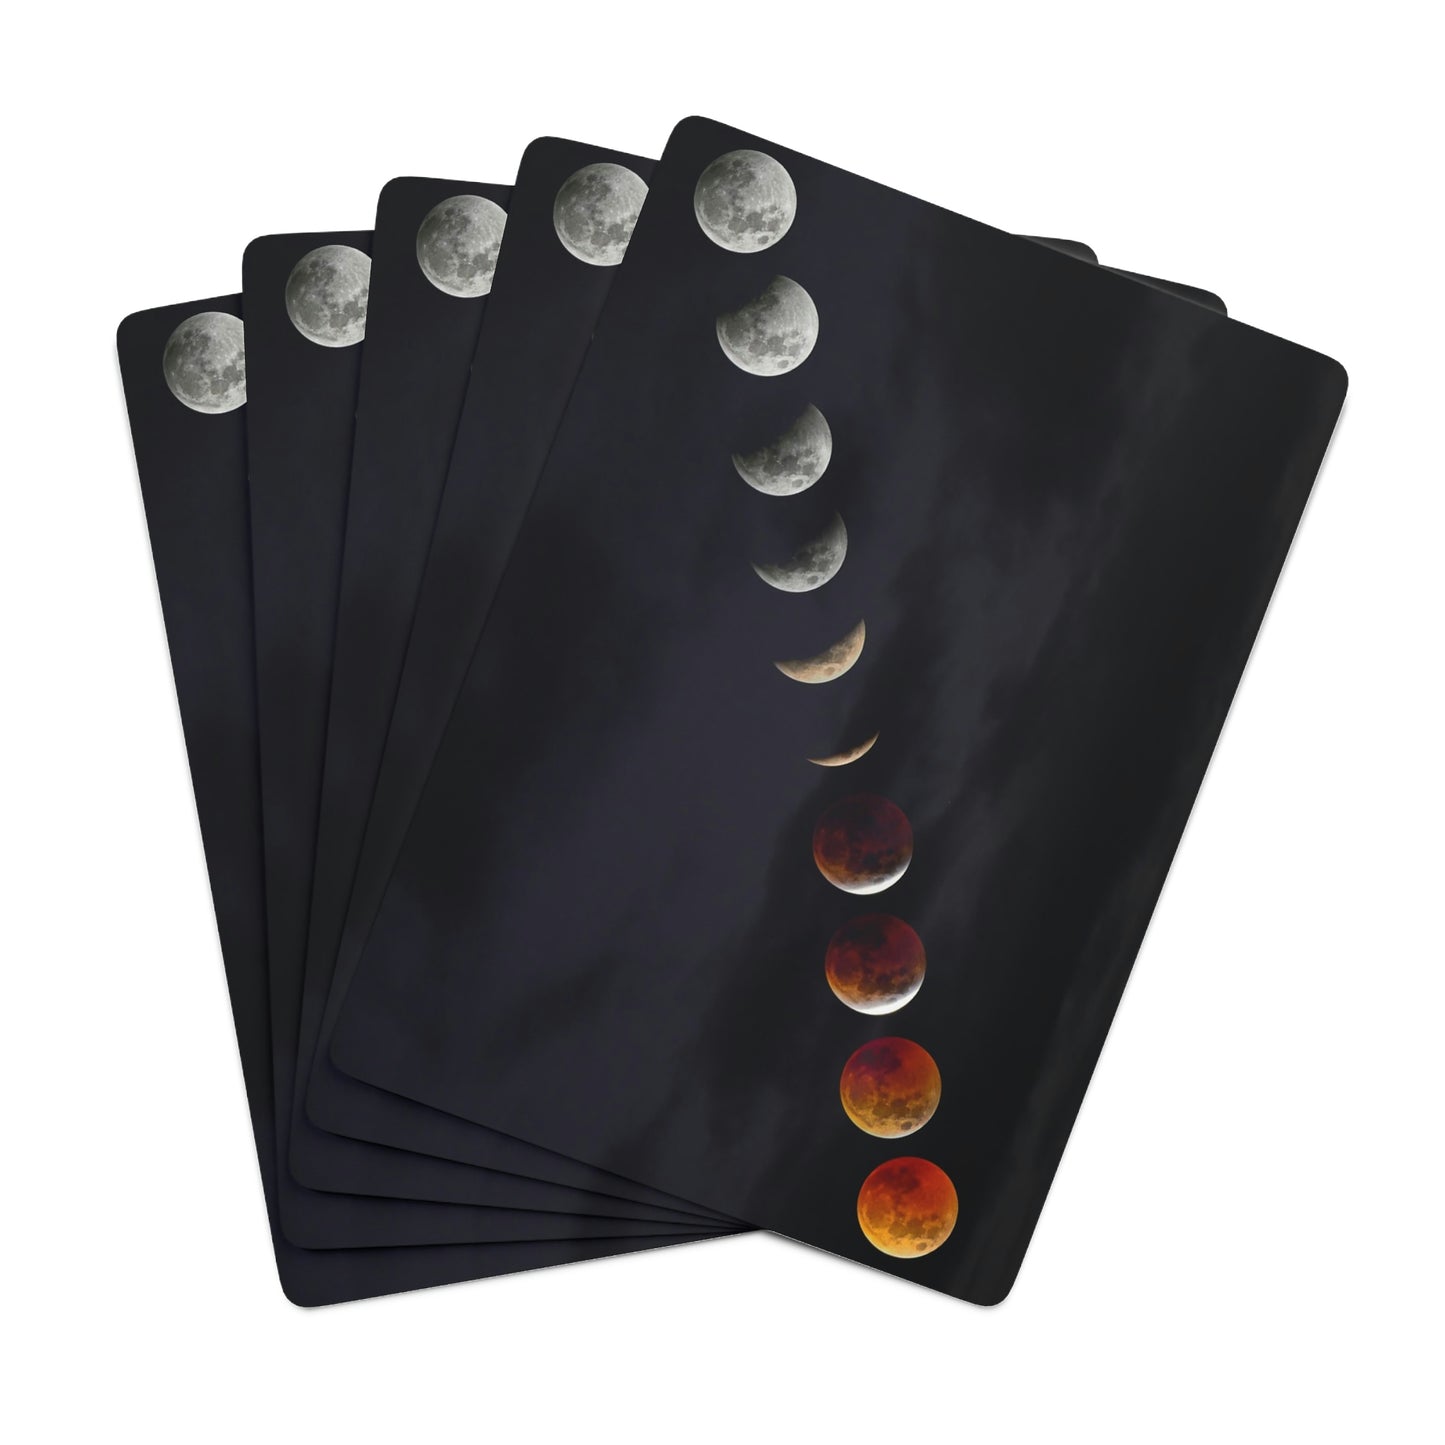 Playing Cards - Lunar Eclipse Timelapse